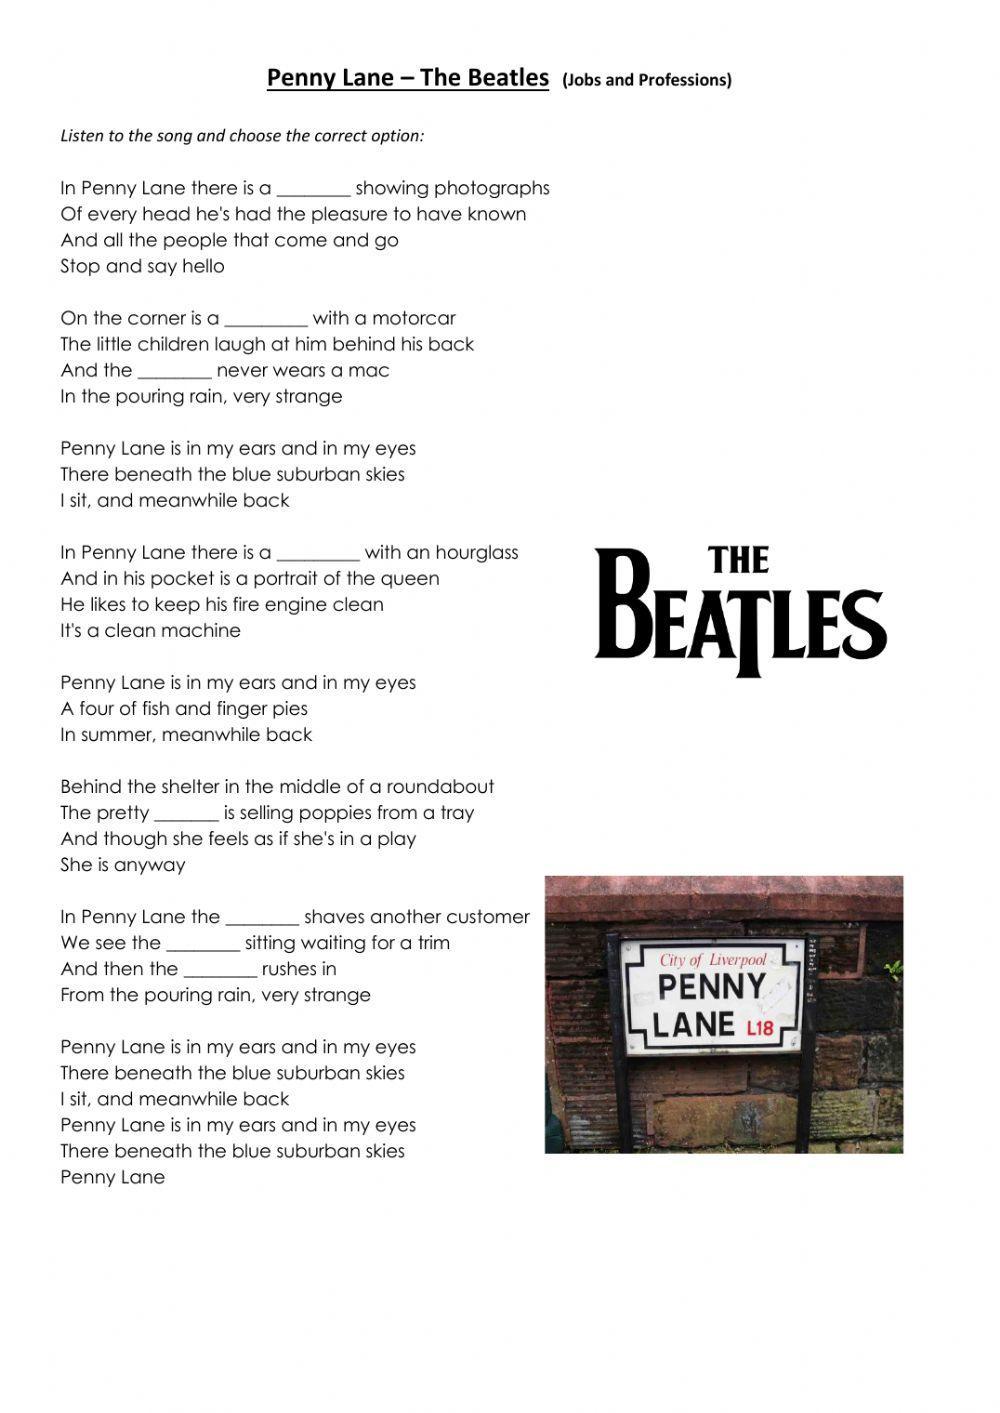 Penny Lane by The Beatles - Jobs